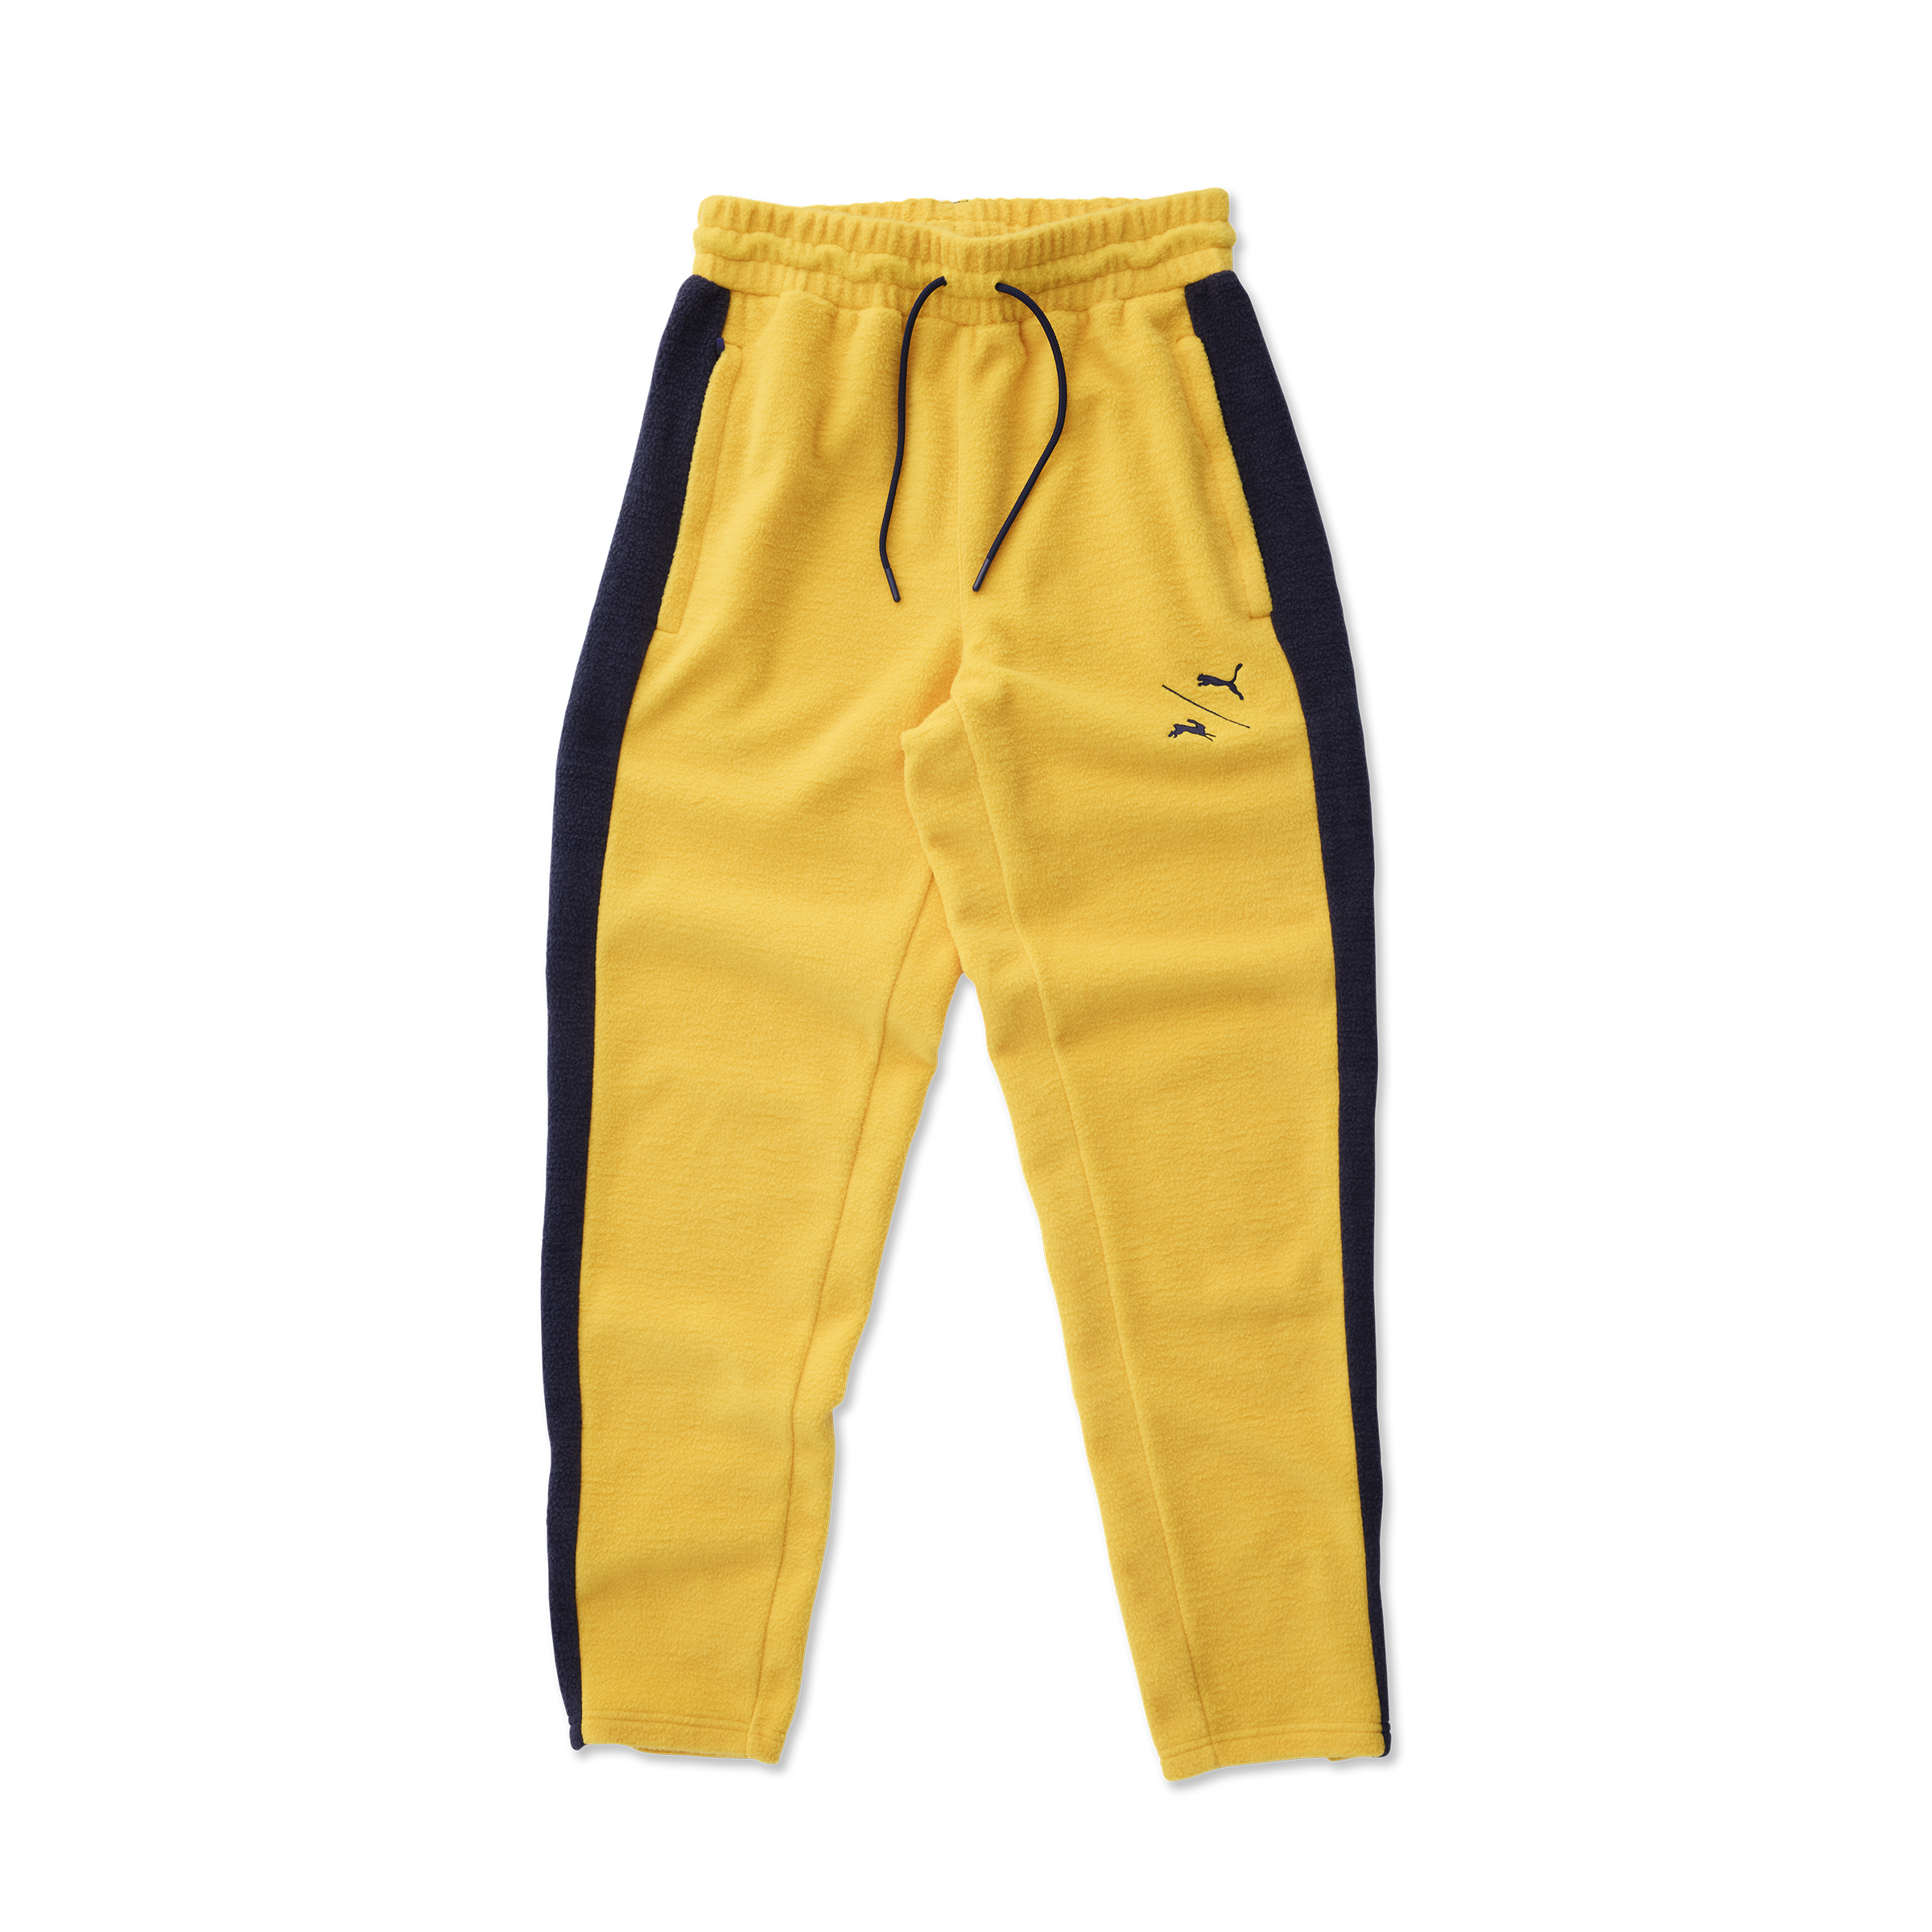 IndividualCUP Training Pants Asphalt-Blu : Amazon.in: Clothing & Accessories